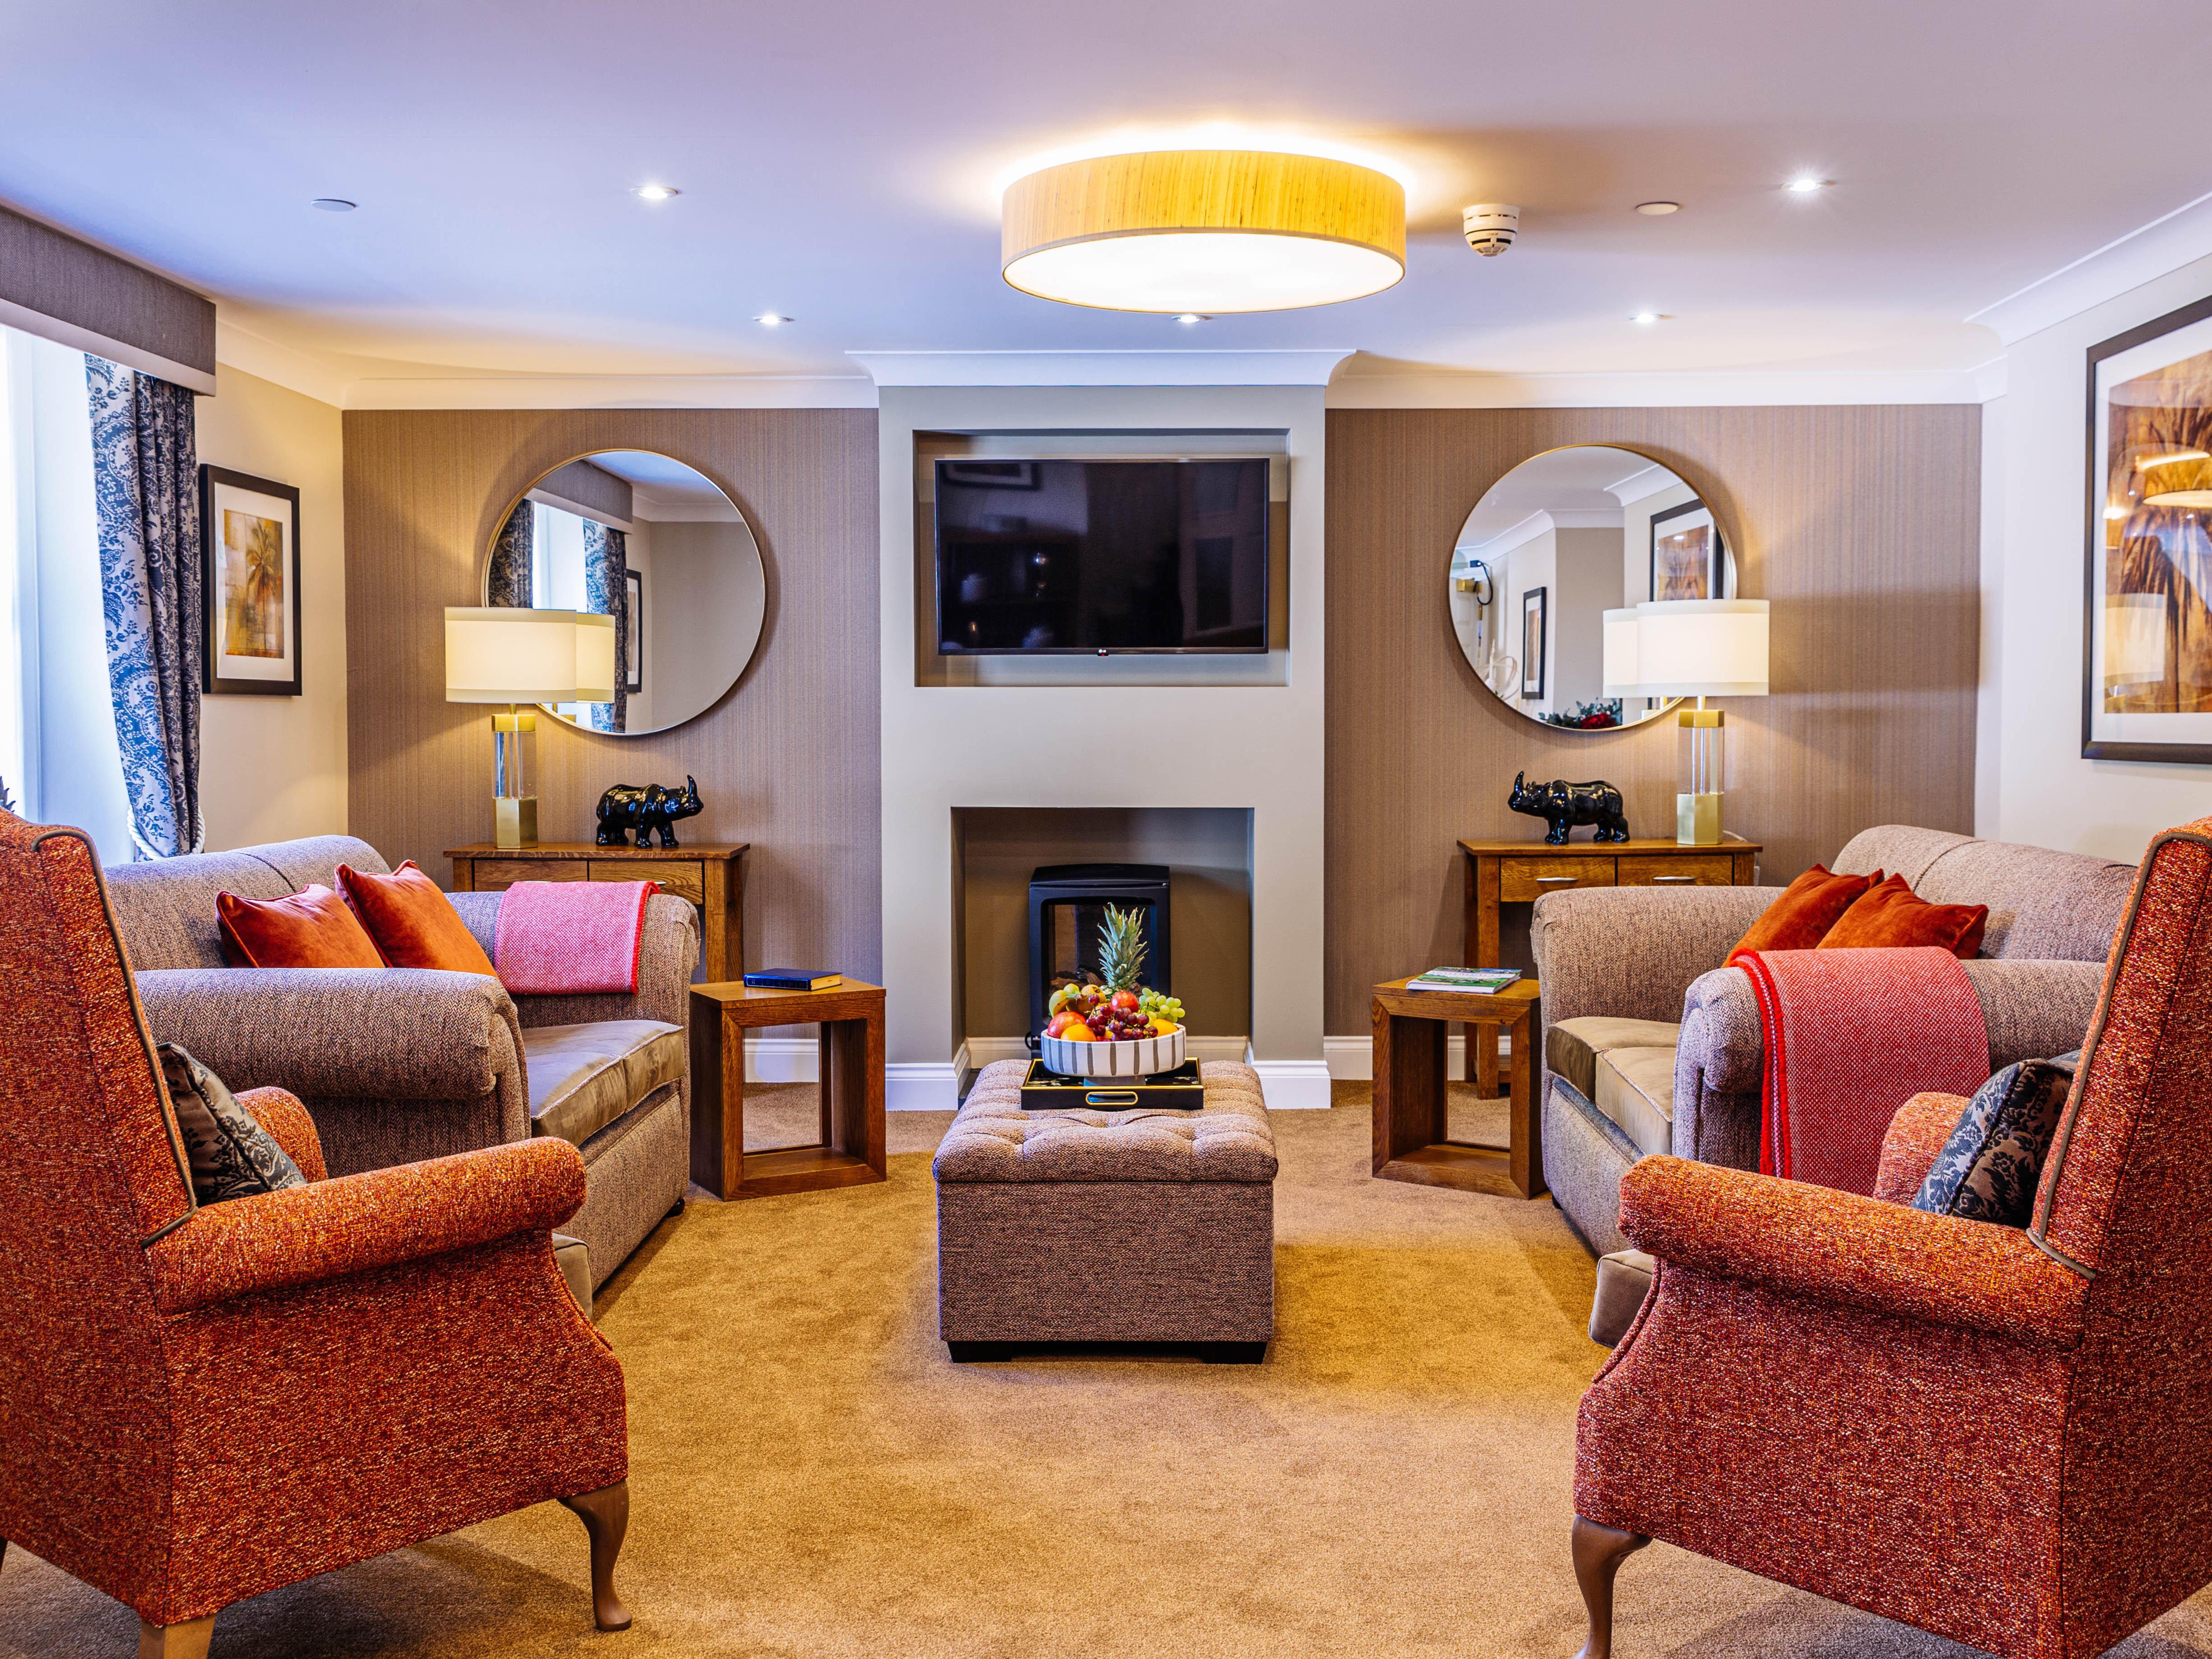 Images Barchester - Glebefields Care Home